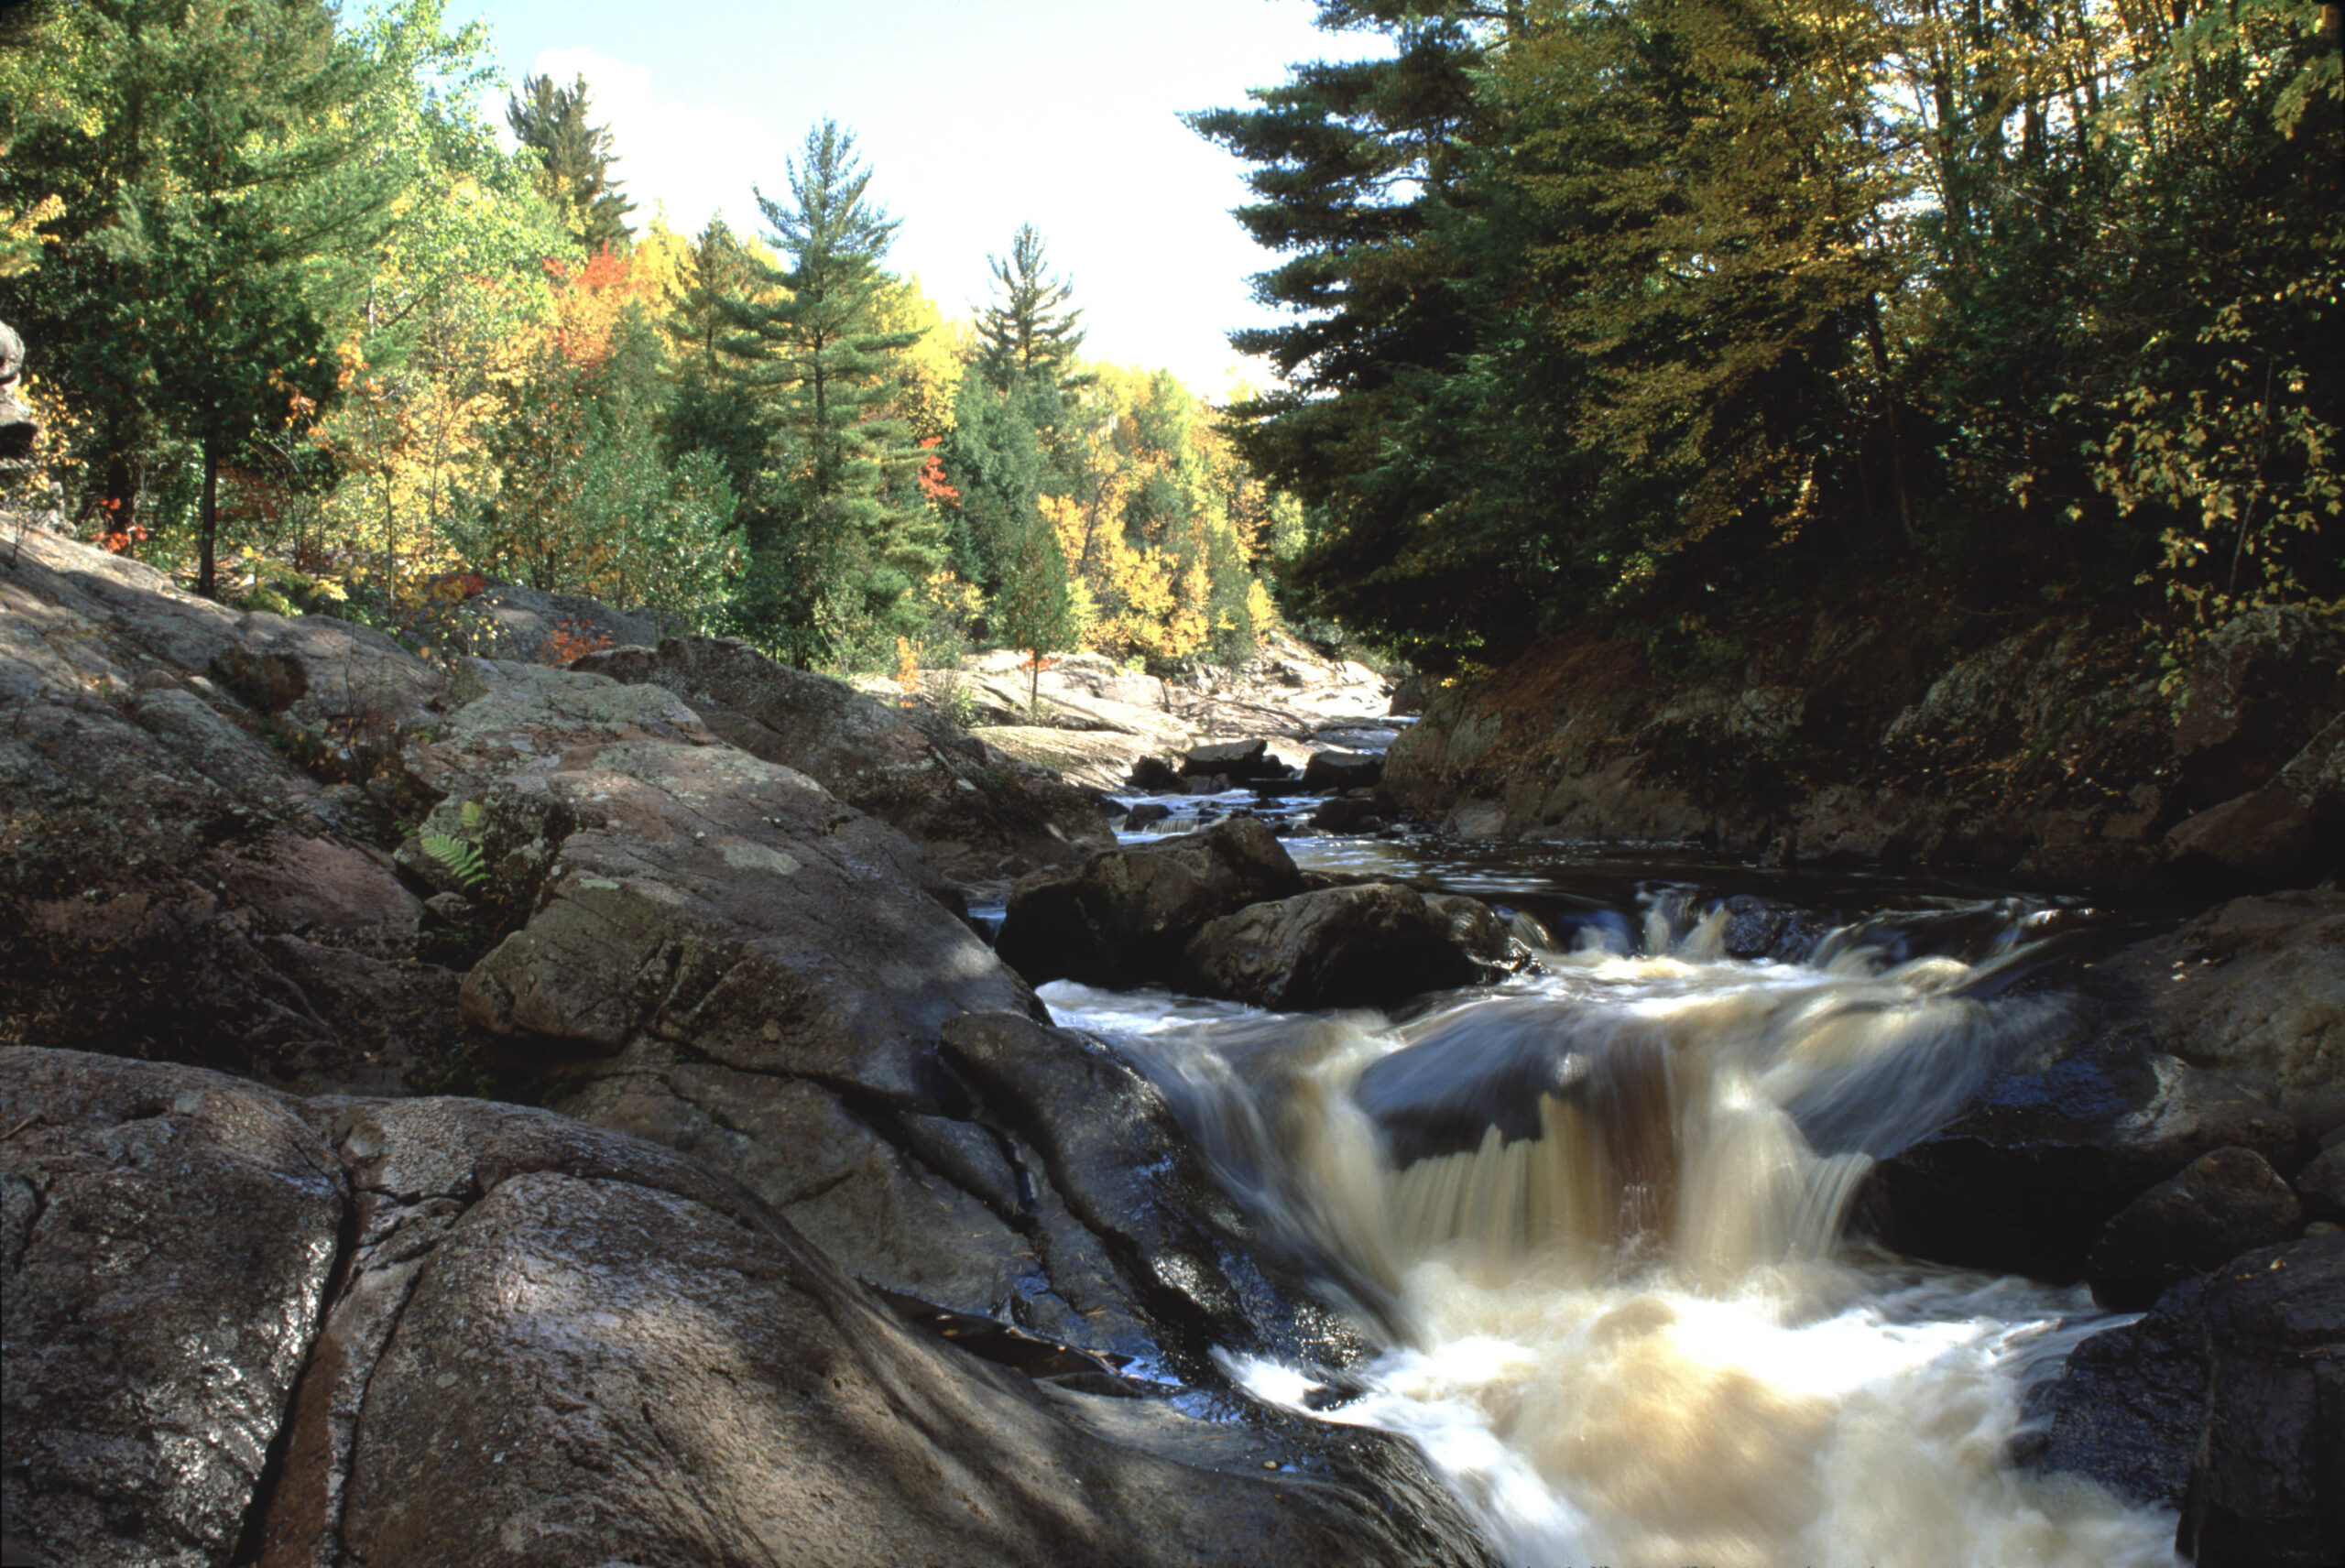 Red Granite Falls is one of the waterfalls at Copper Falls State Park northeast of Mellen